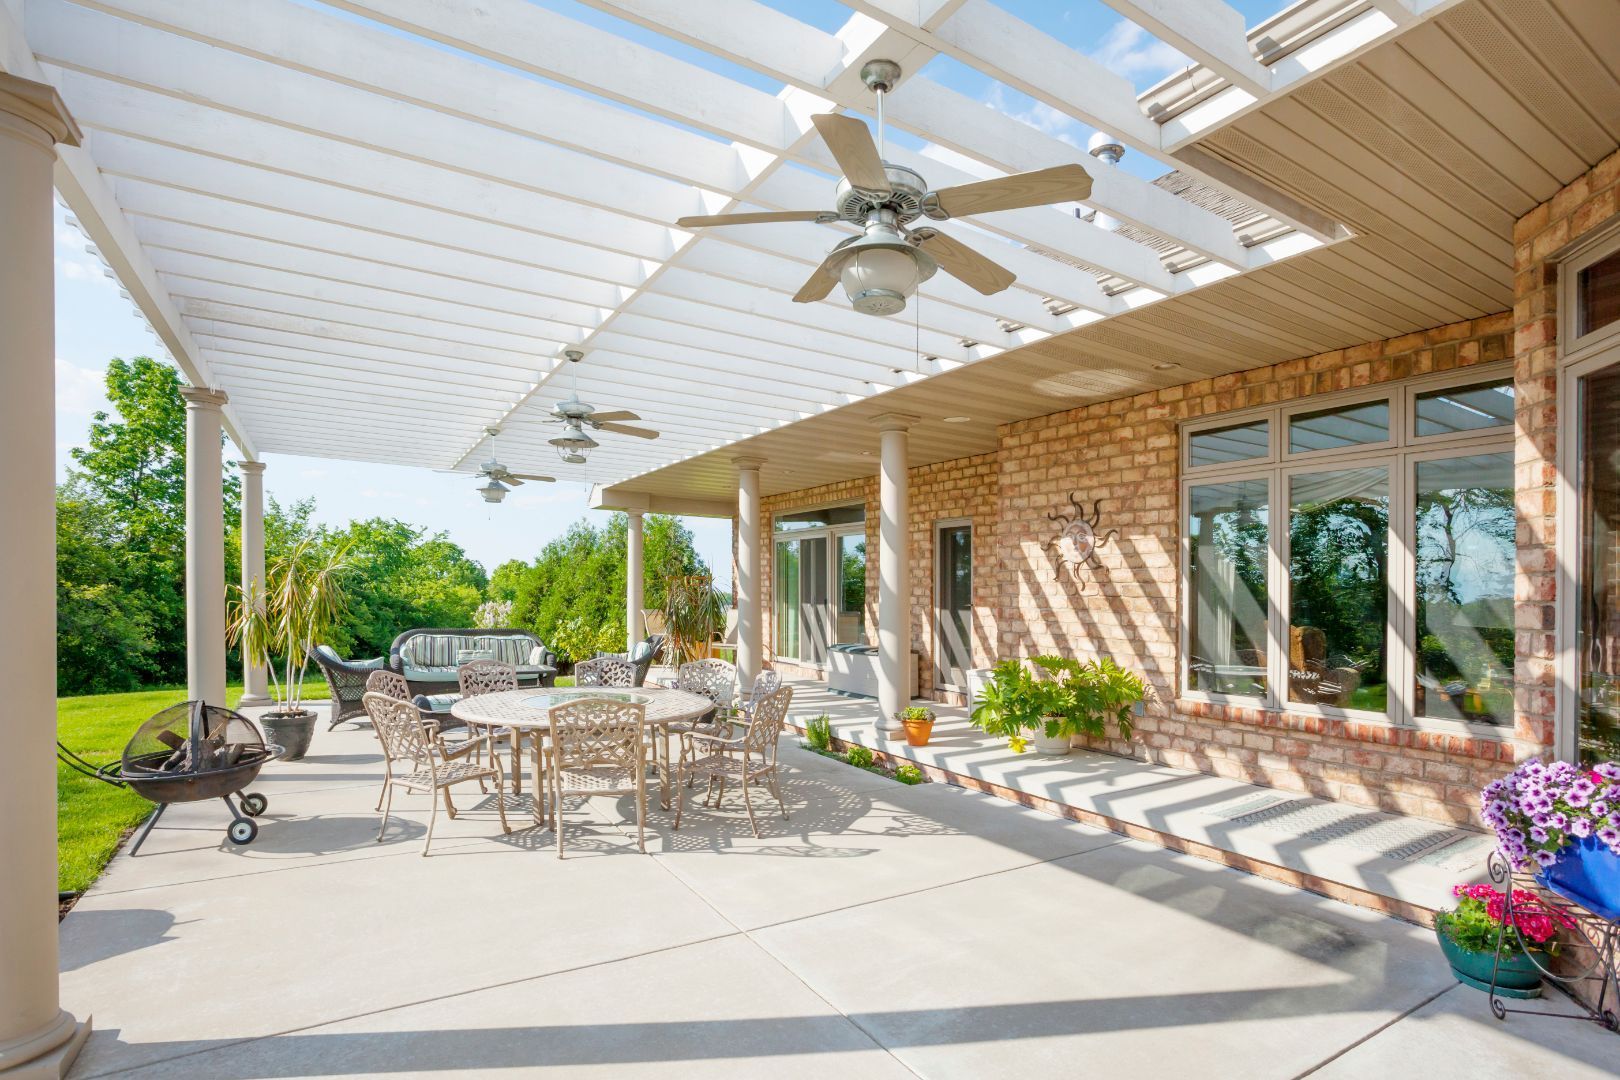 An image of Concrete Patio in Morrisville, NC